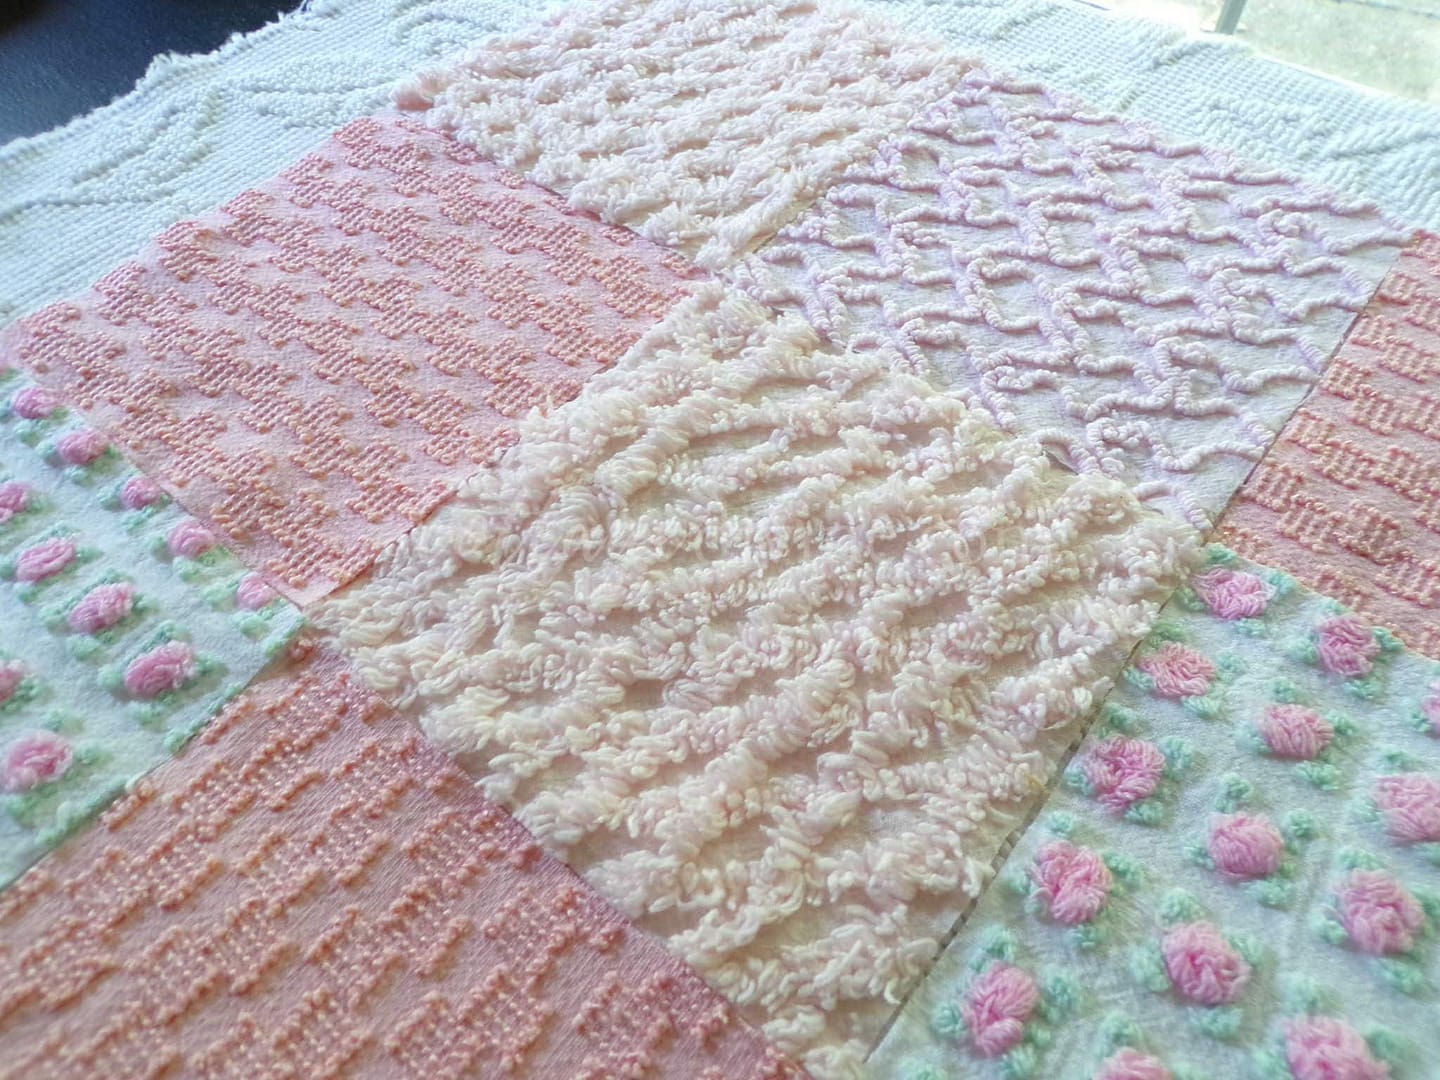 Peach Radiance Quilt Squares Set, Rotary Cut from Vintage Chenille  Bedspread Fabric, 16 Blocks, 6 x 6 inch - The Cottage Divine, a  NIGHTWATCH CO.